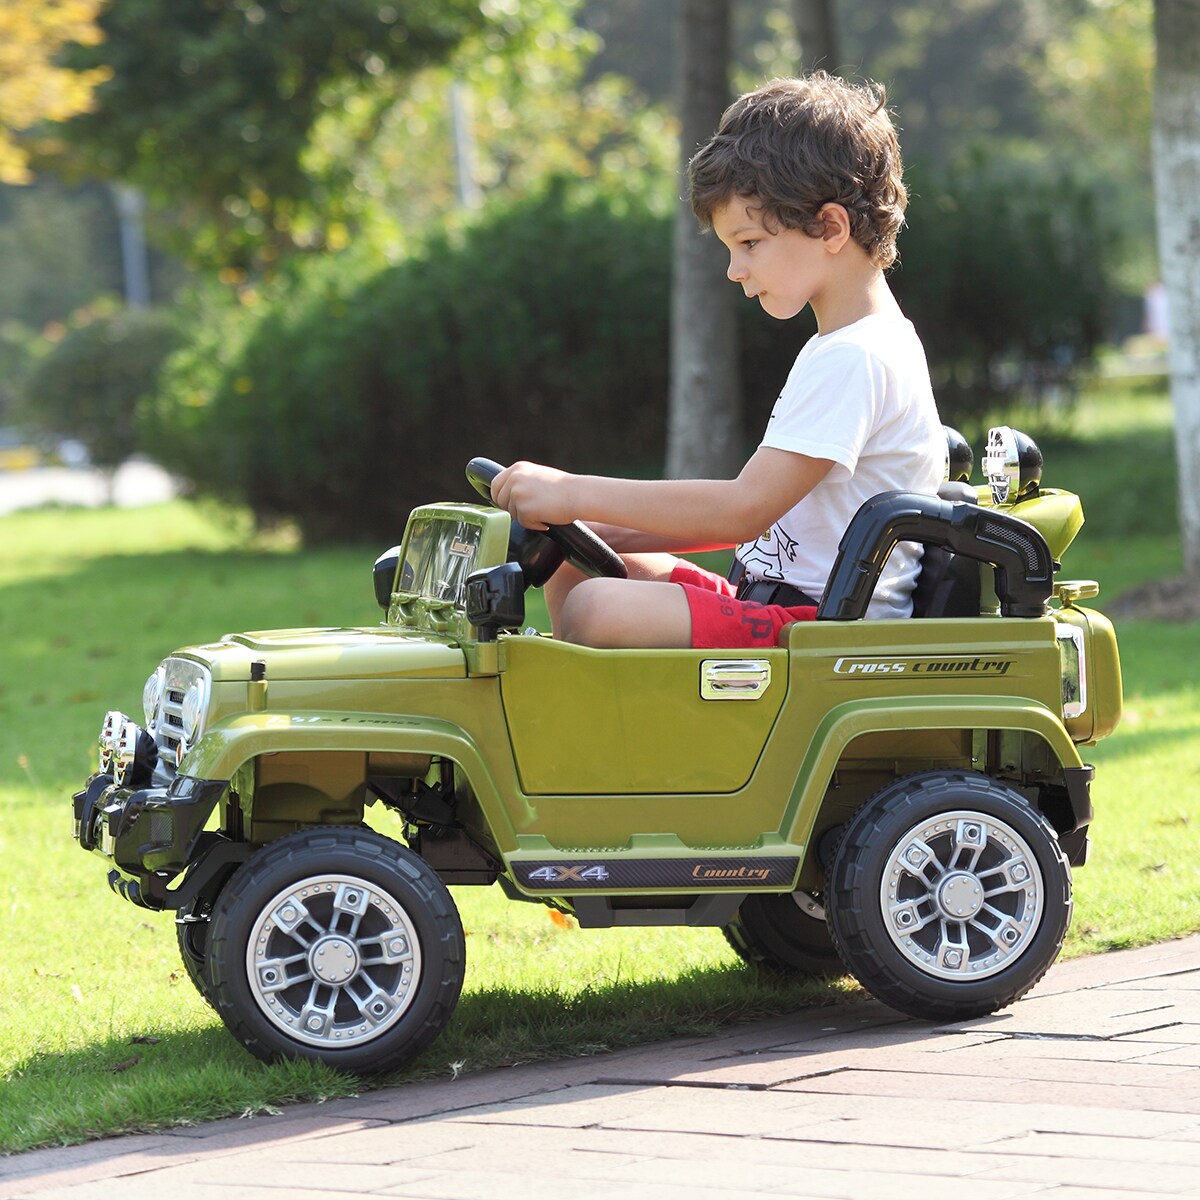 6v Ride on Car Kids Electric Battery Power 2 Motor W/remote Control Mp3 2021 for sale online 